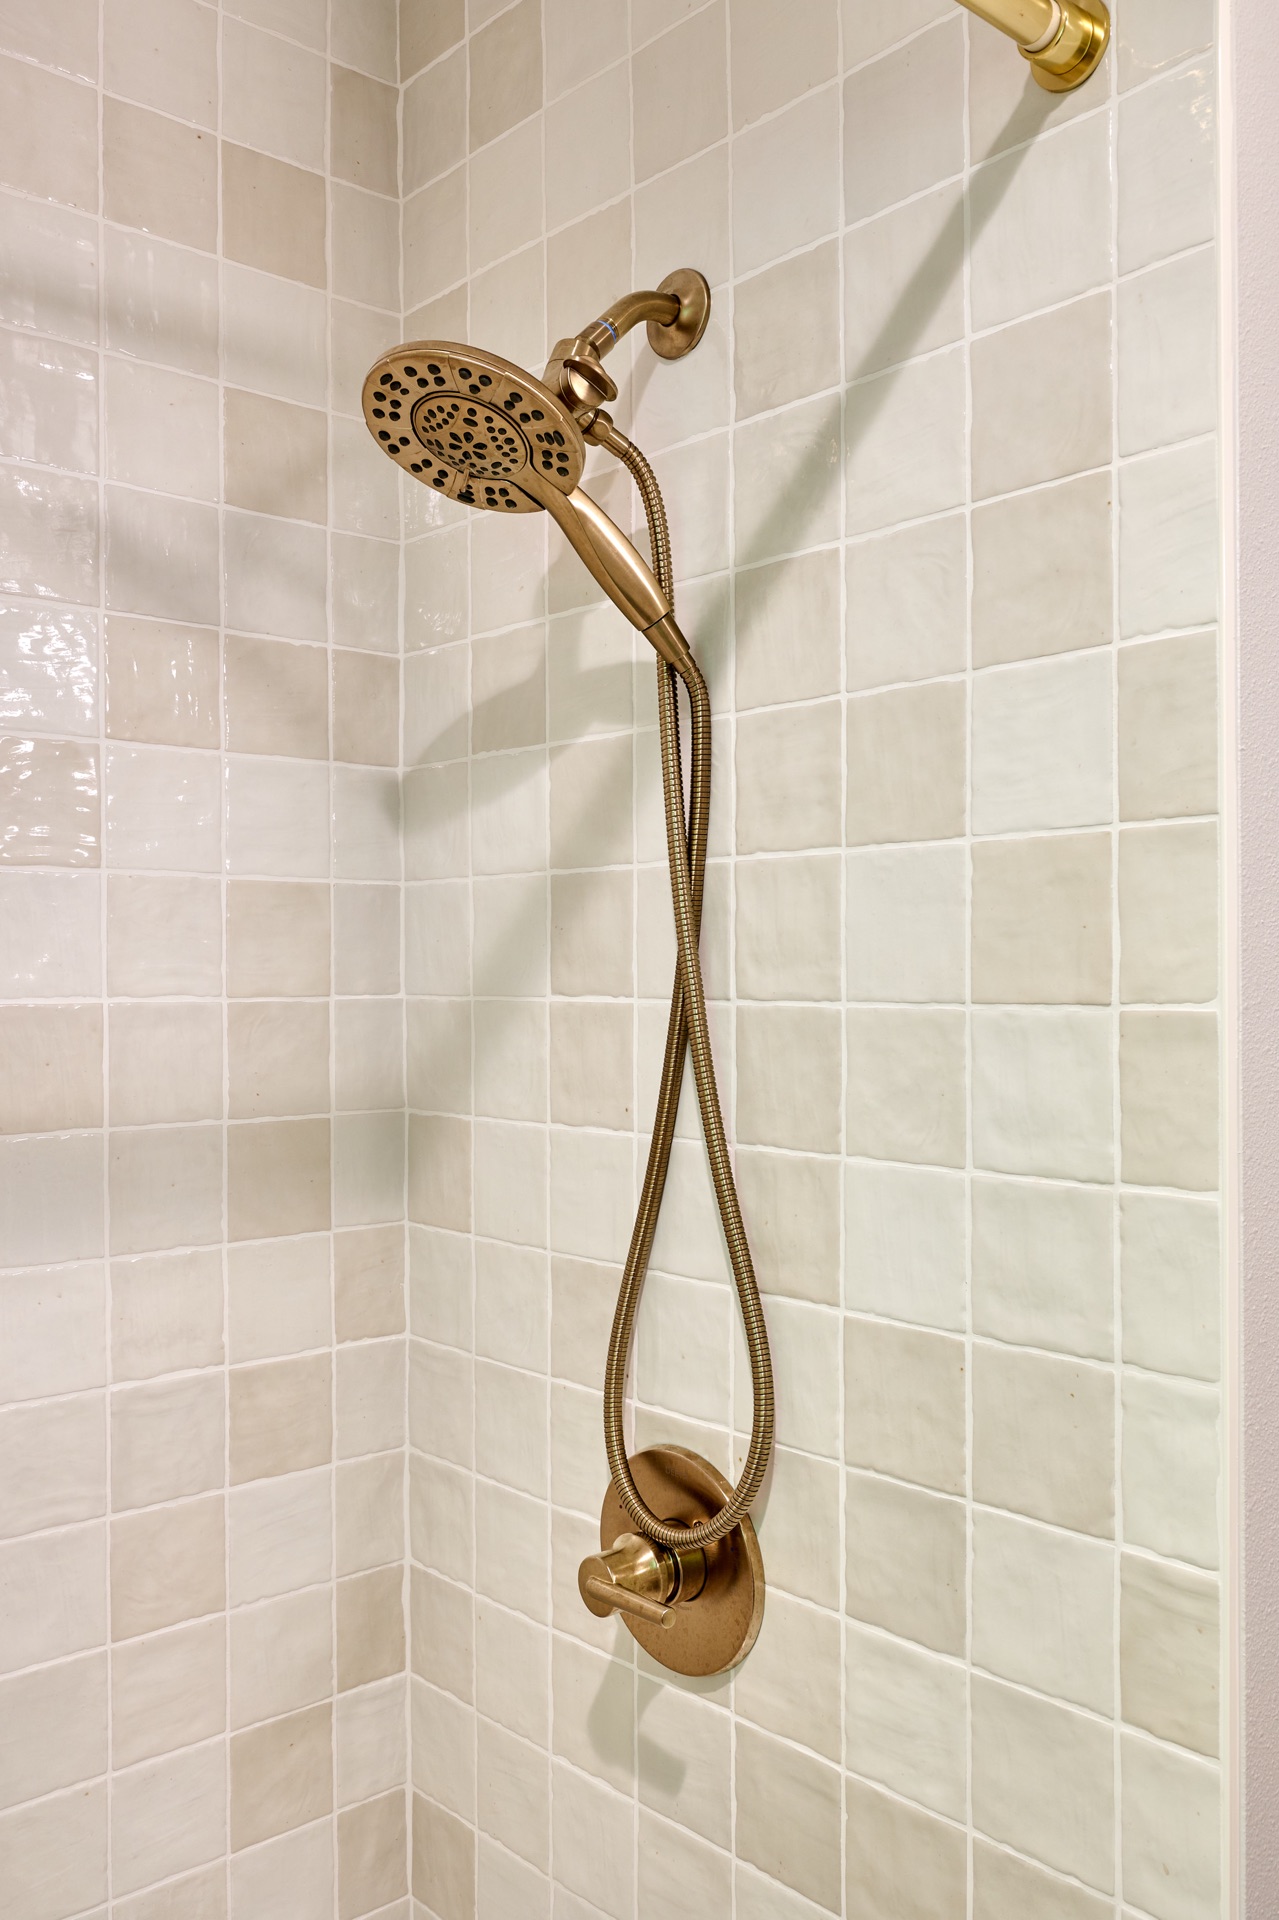 Brush gold bath fixtures are a statement of luxury in this bathroom remodel by Powell Construction